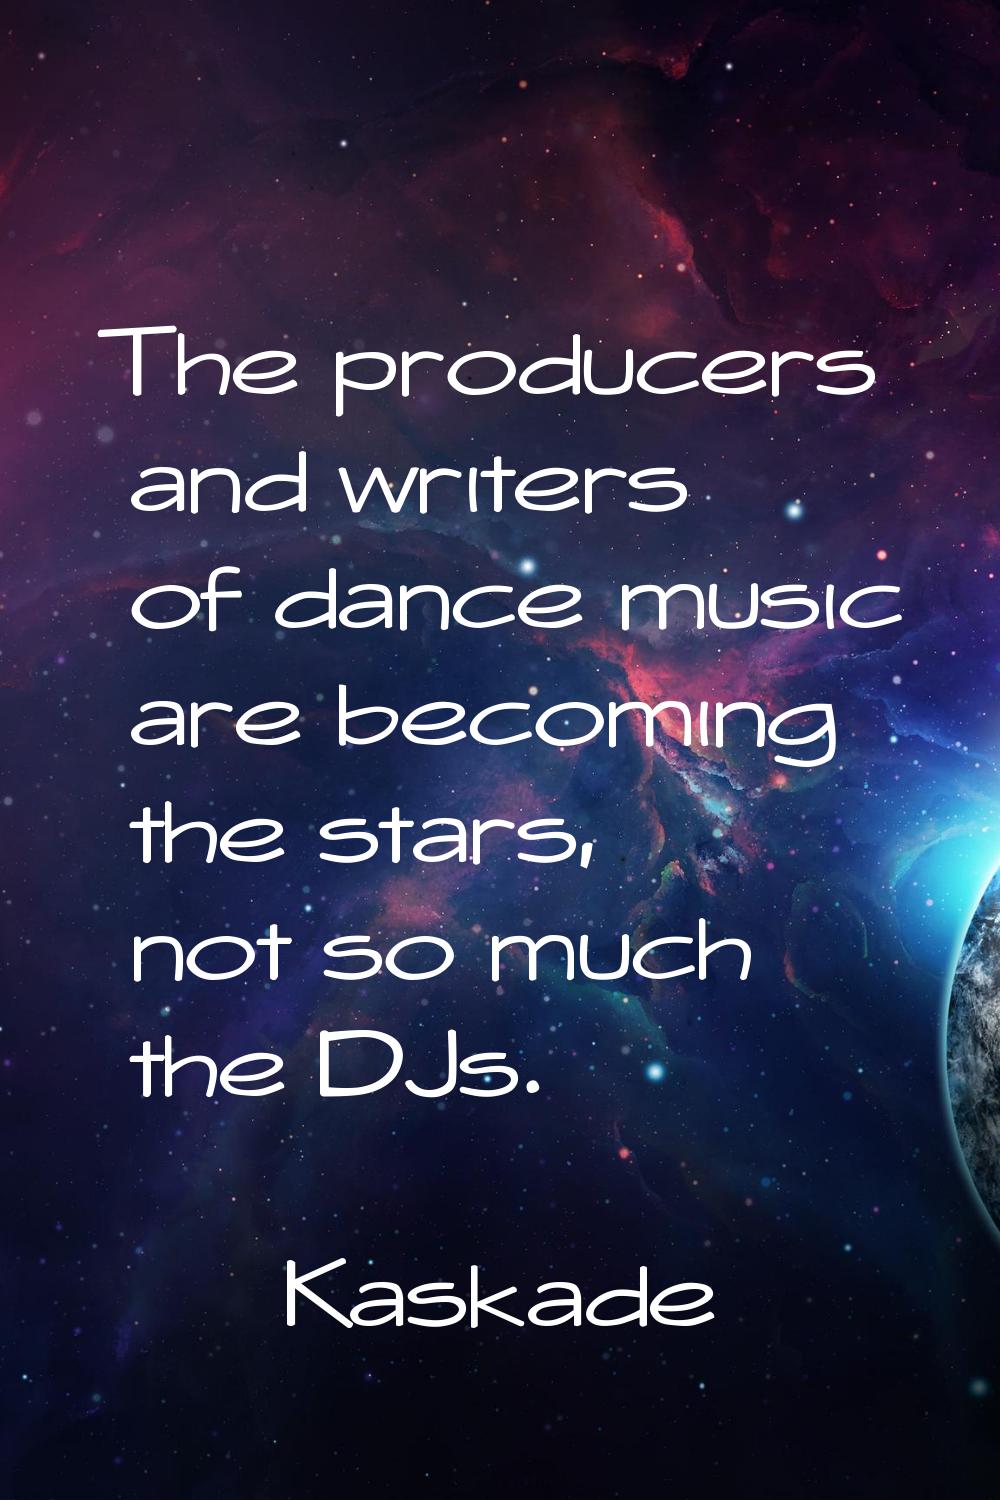 The producers and writers of dance music are becoming the stars, not so much the DJs.